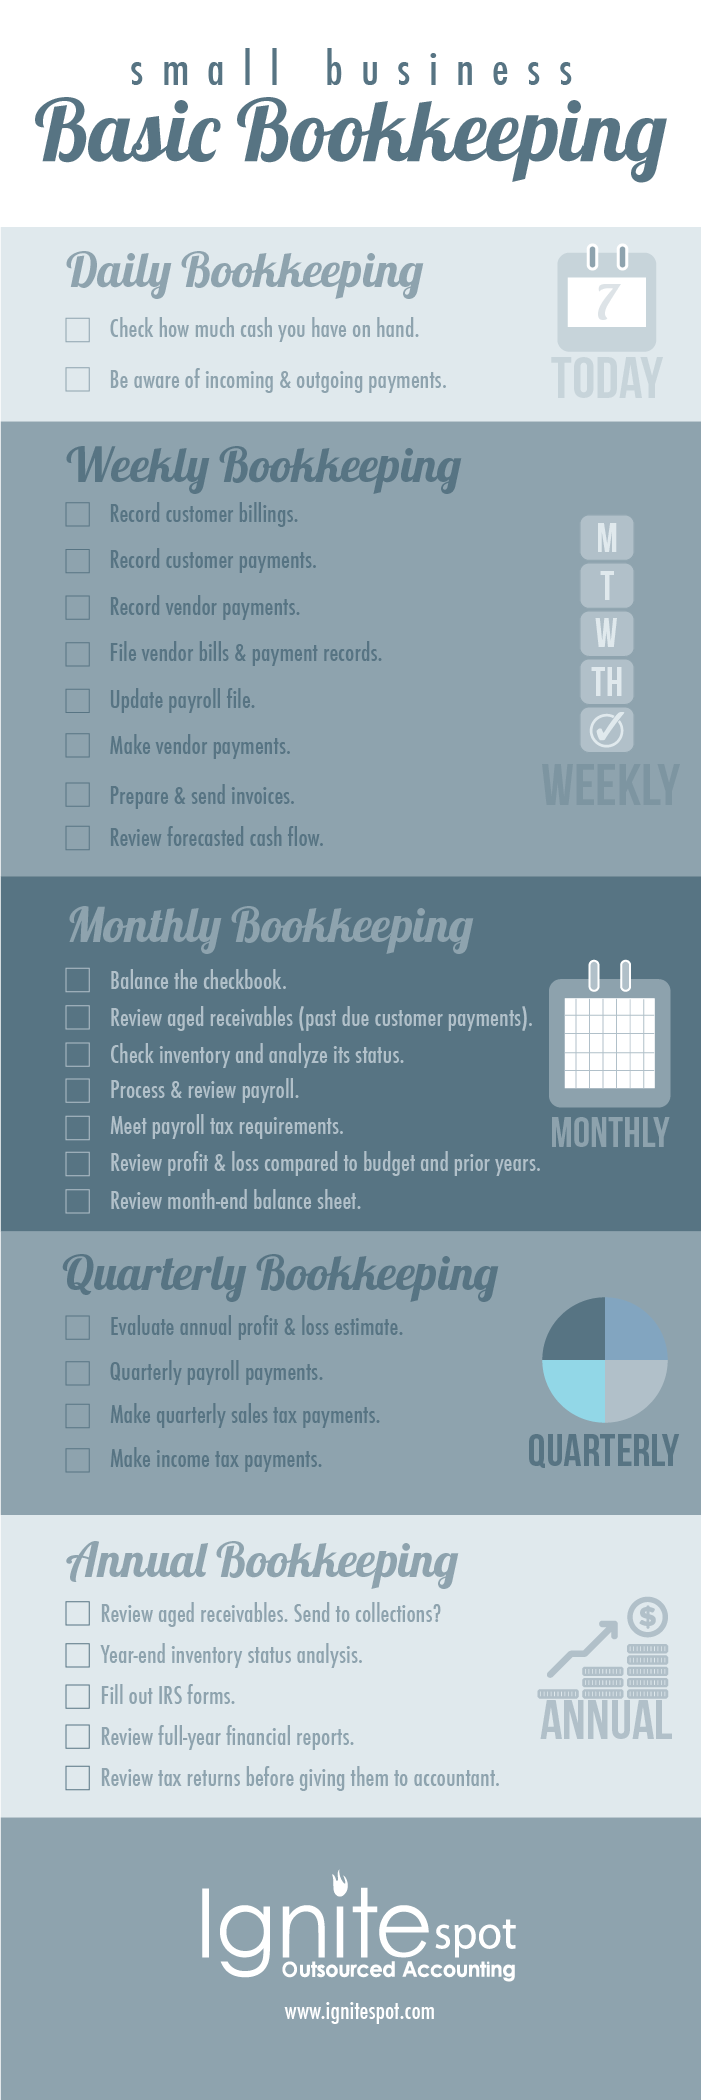 How to start your own bookkeeper business
